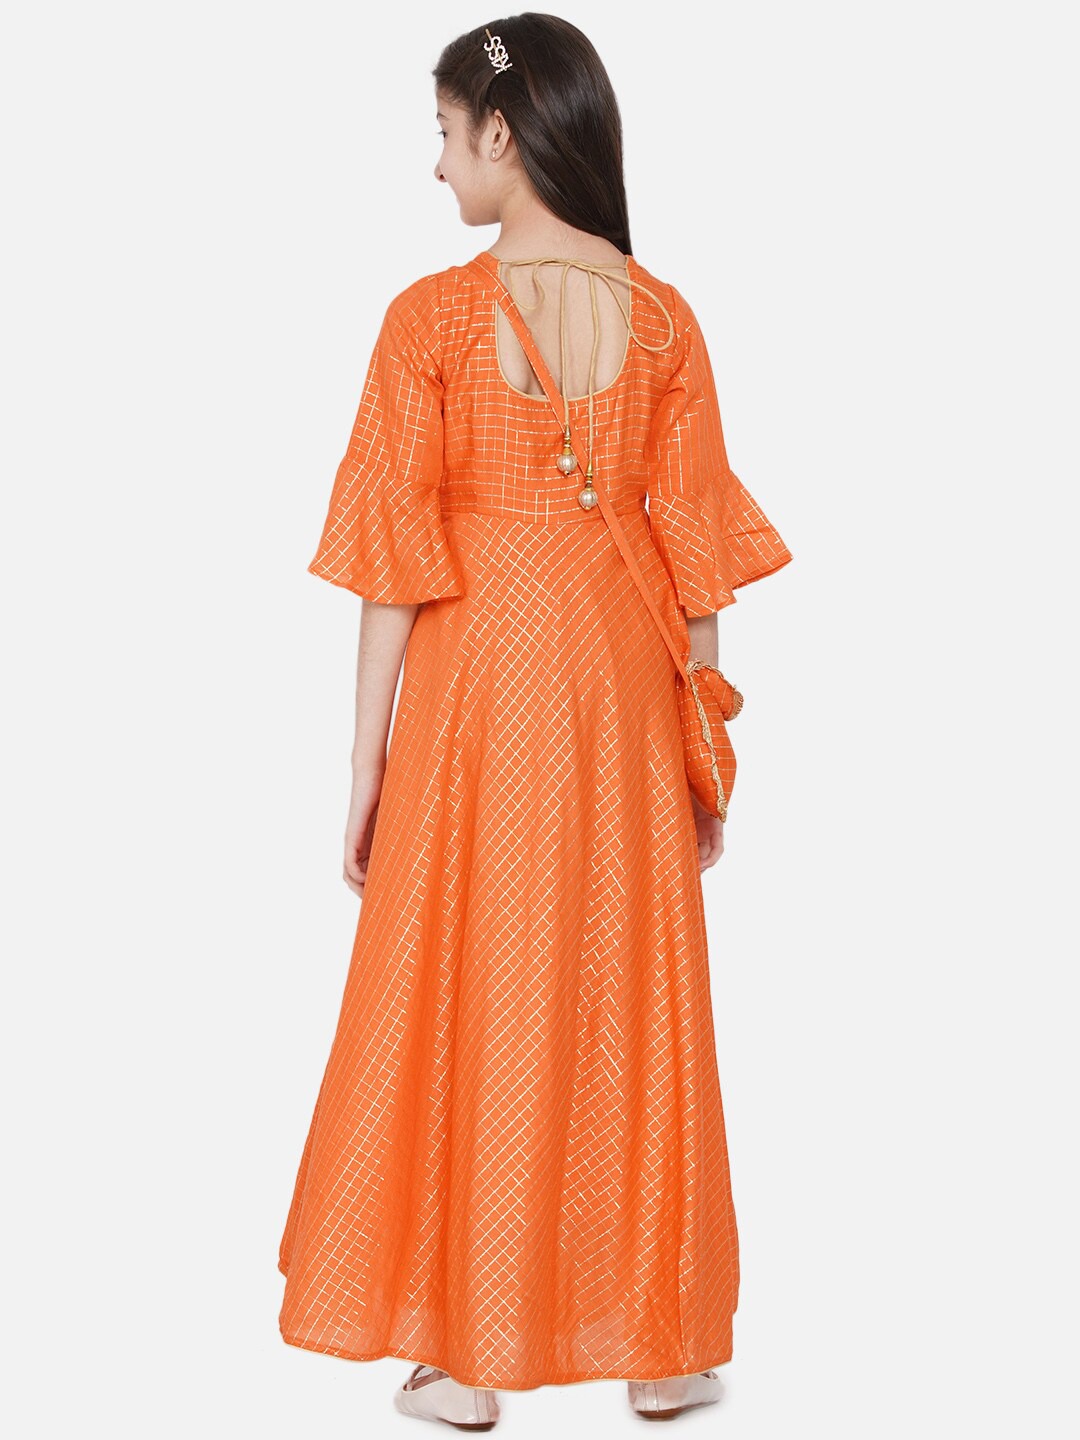 Orange Prom Dresses Long, Plus Size & More - STACEES